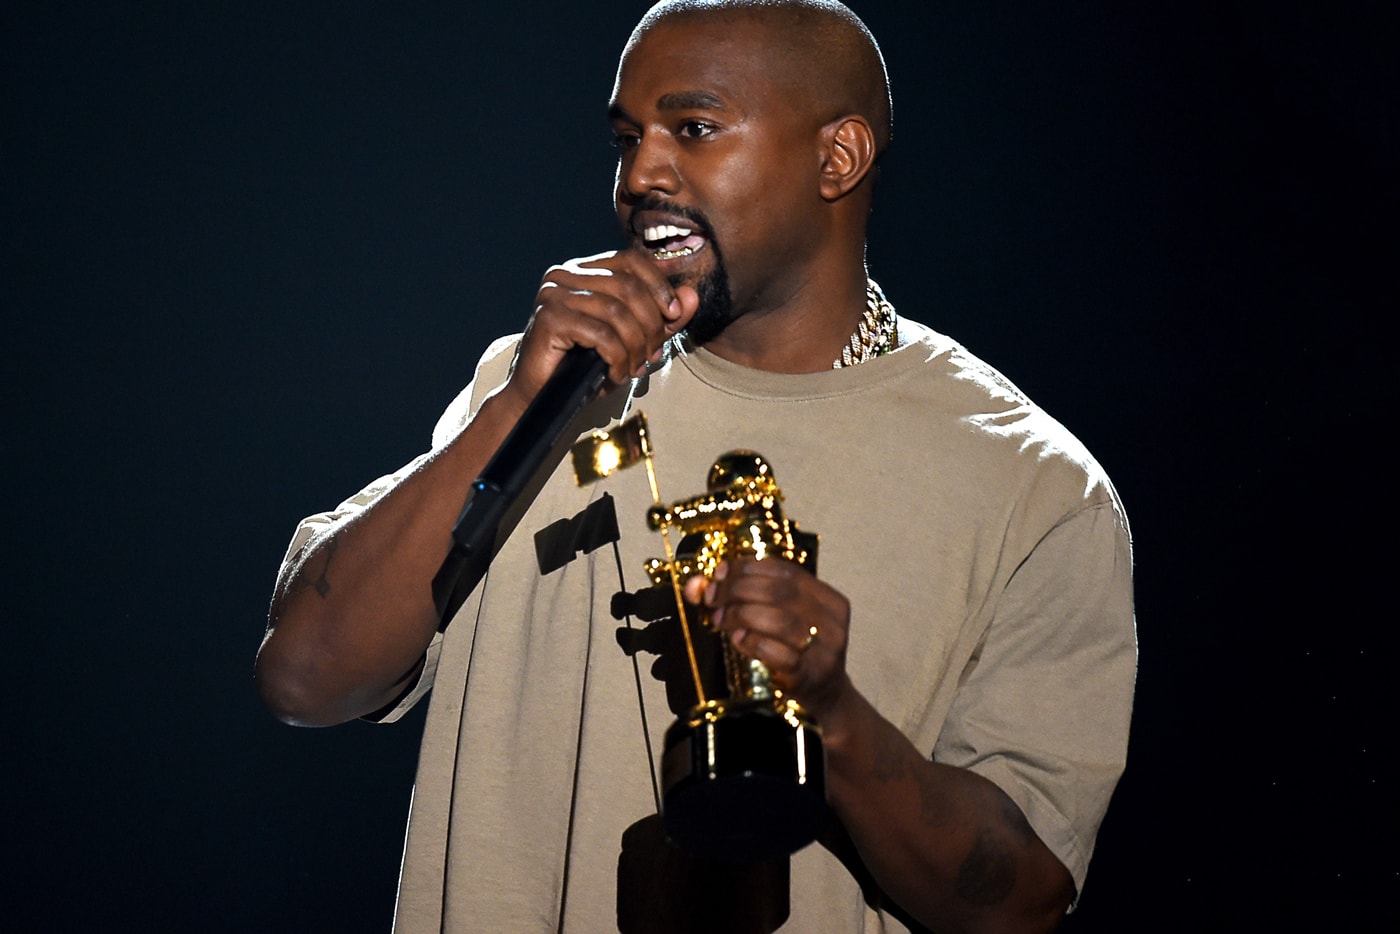 Kanye West Reveals New Album's Title is 'The Life of Pablo' and Shares Tracklist